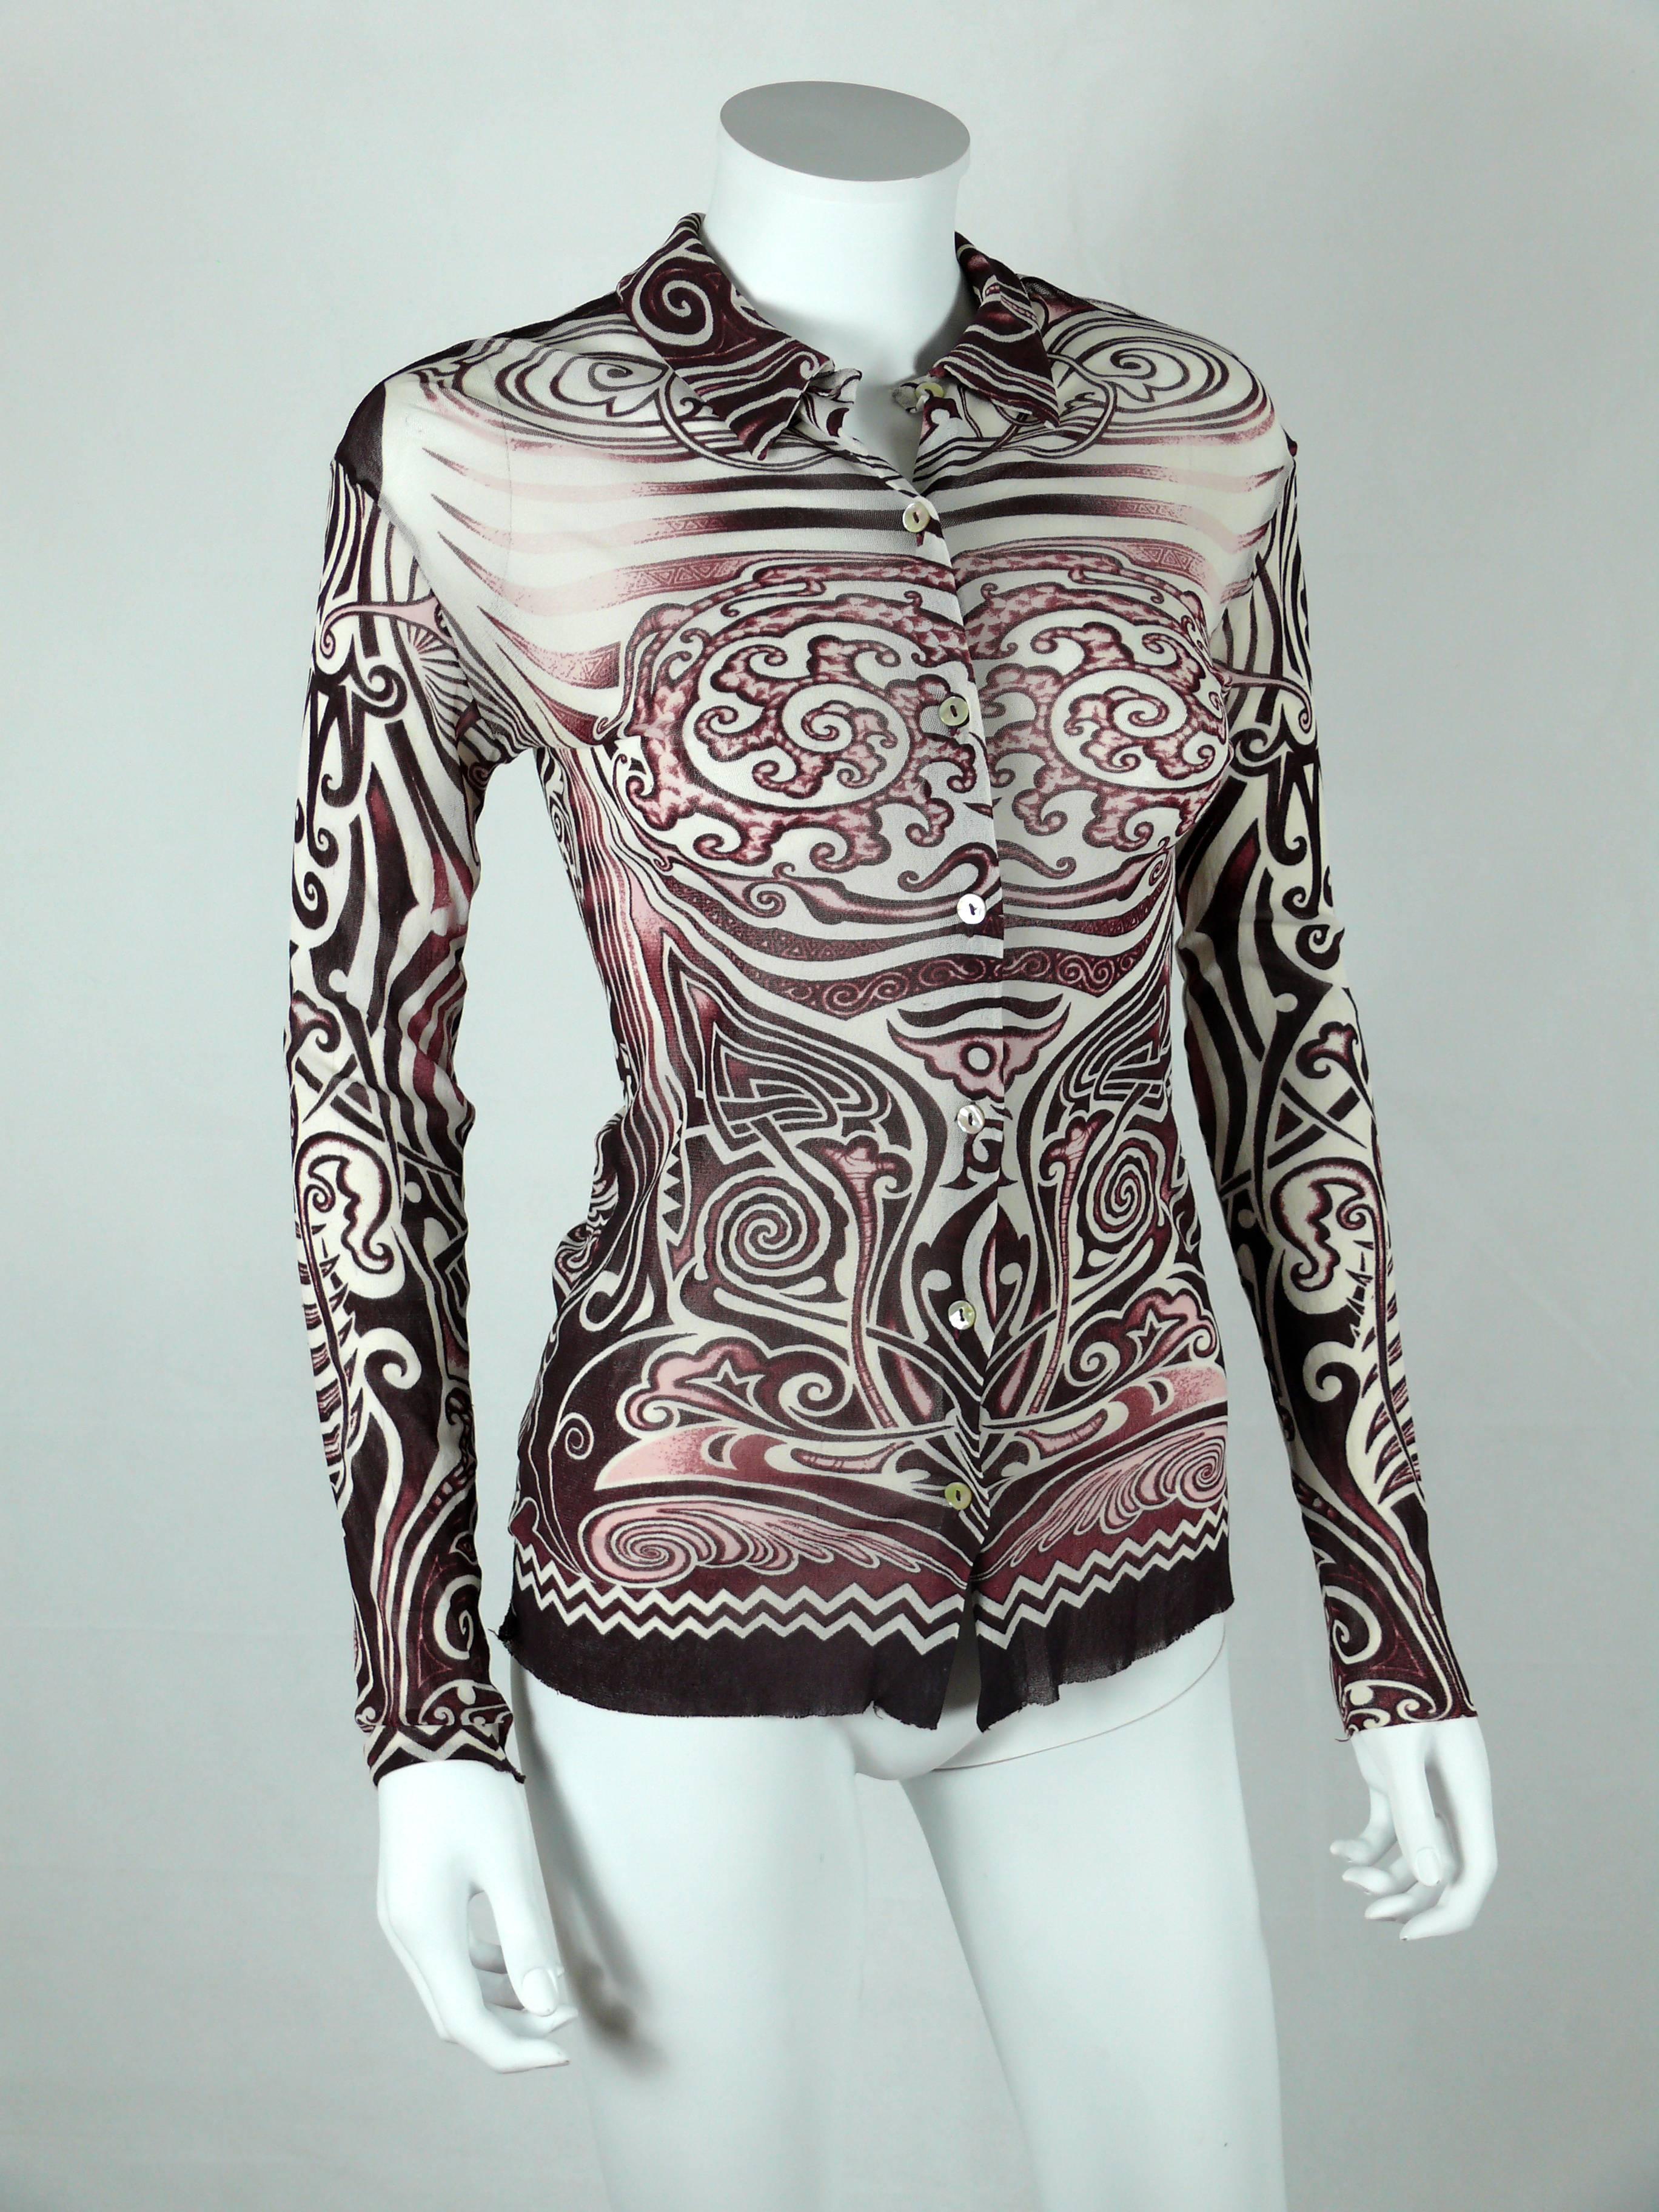 JEAN PAUL GAULTIER vintage streetchy unisex Fuzzi mesh tribal tatoo shirt.

Label reads JEAN PAUL GAULTIER Maille.

Marked size : M.
Please refer to measurements.

Composition label reads : 100% nylon.

Indicative measurements taken laid